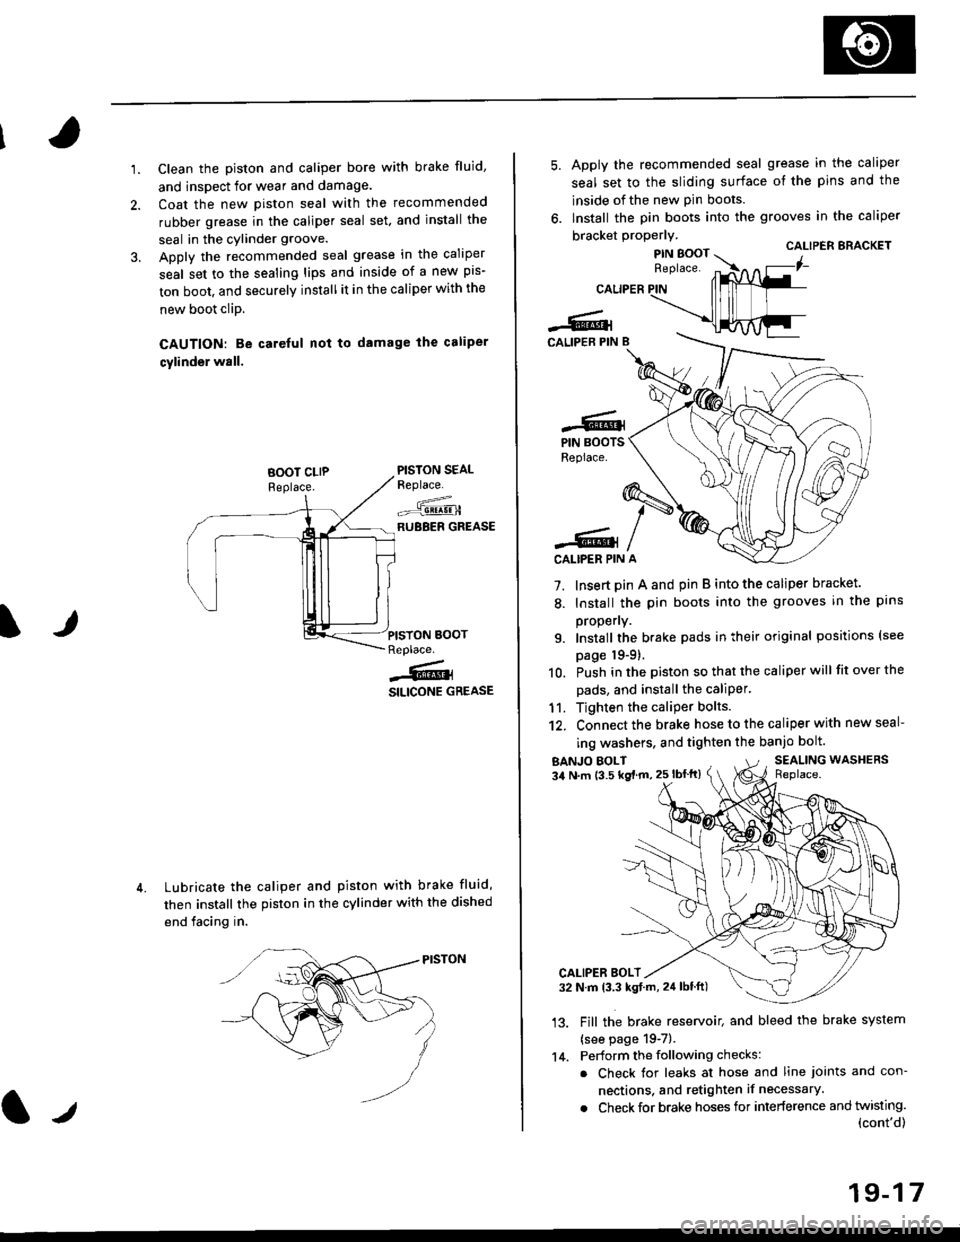 HONDA CIVIC 1999 6.G Workshop Manual 1.Clean the piston and caliper bore with brake fluid,
and inspect for wear and damage.
Coat the new piston seal with the recommended
rubber grease in the caliper seal set. and install the
seal in the